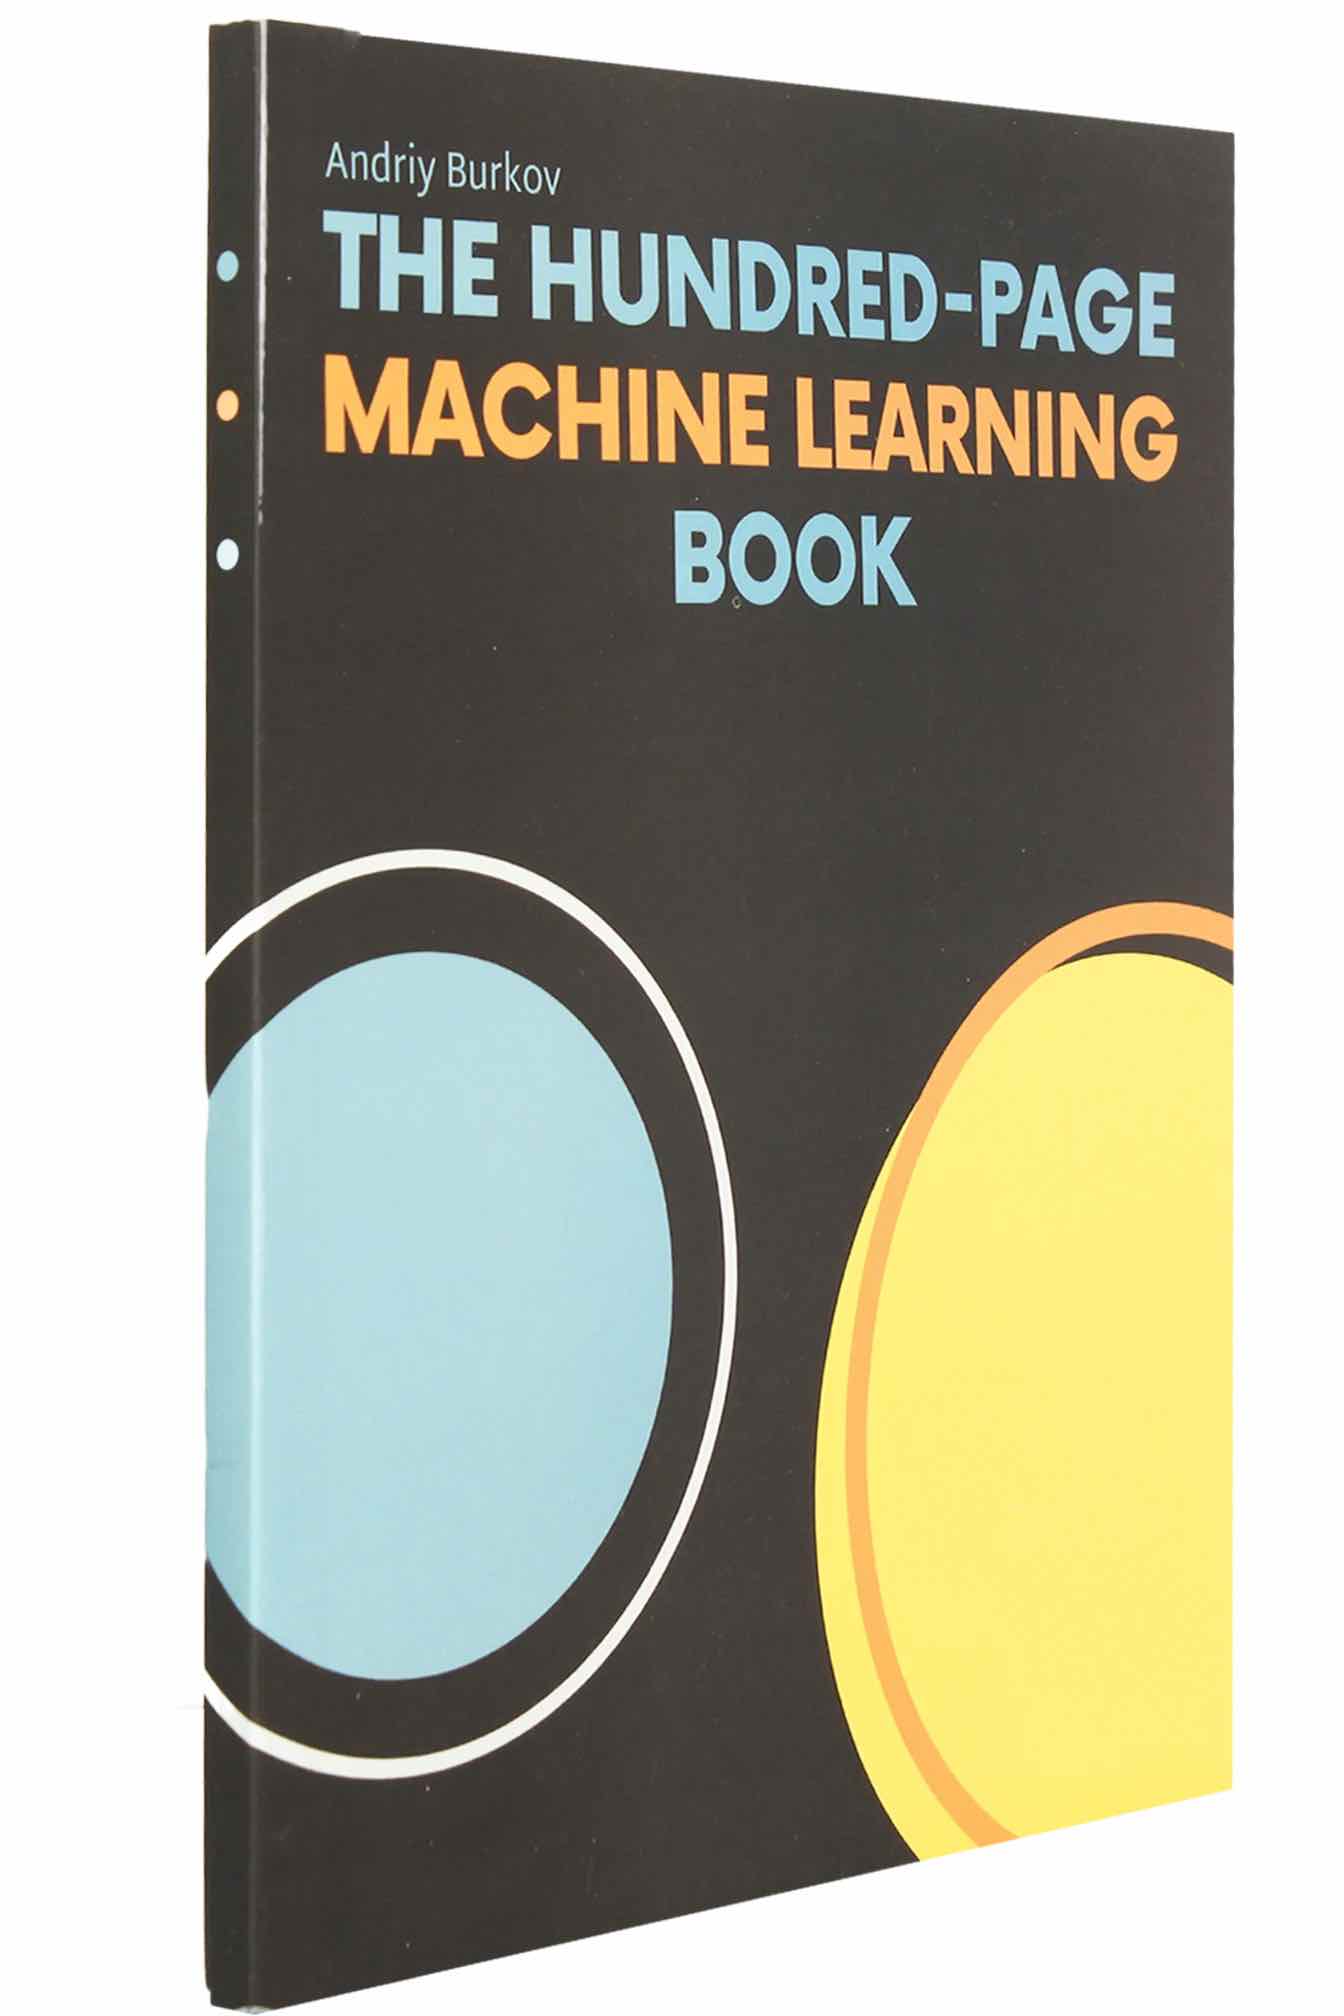 Book Review: The Hundred Page Machine Learning Book